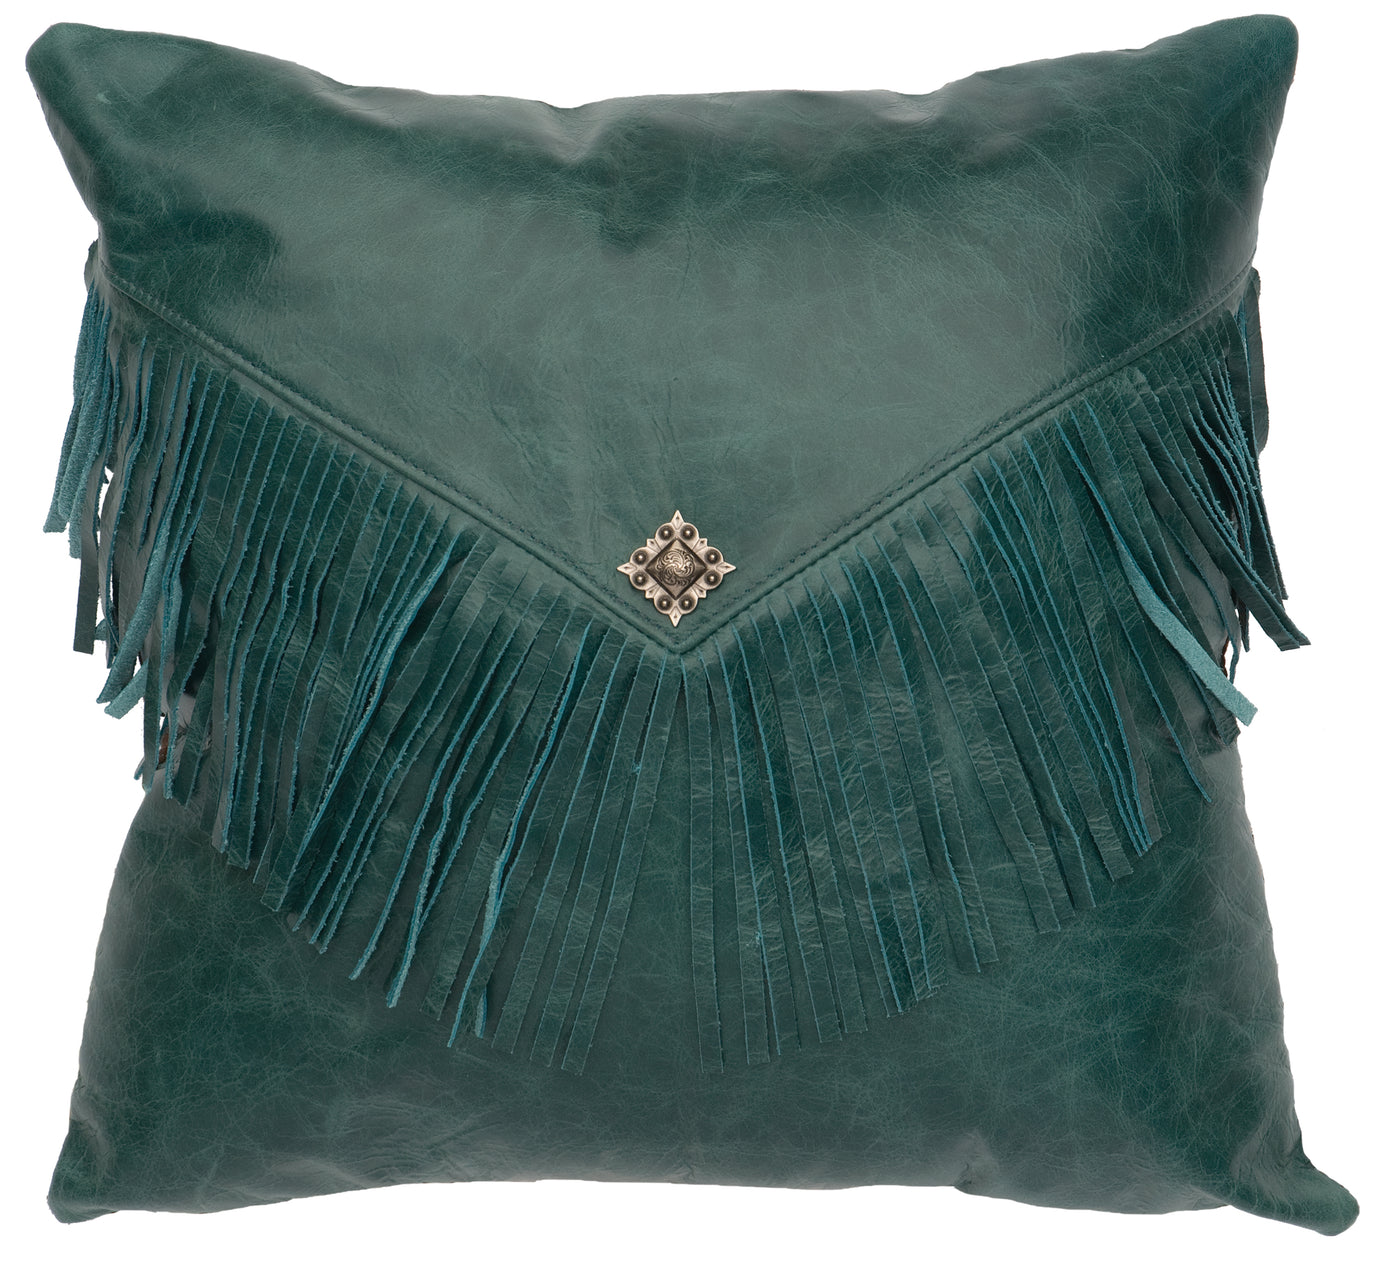 Canvello Peacock Leather Pillow - Leather Back - 16" x 16"